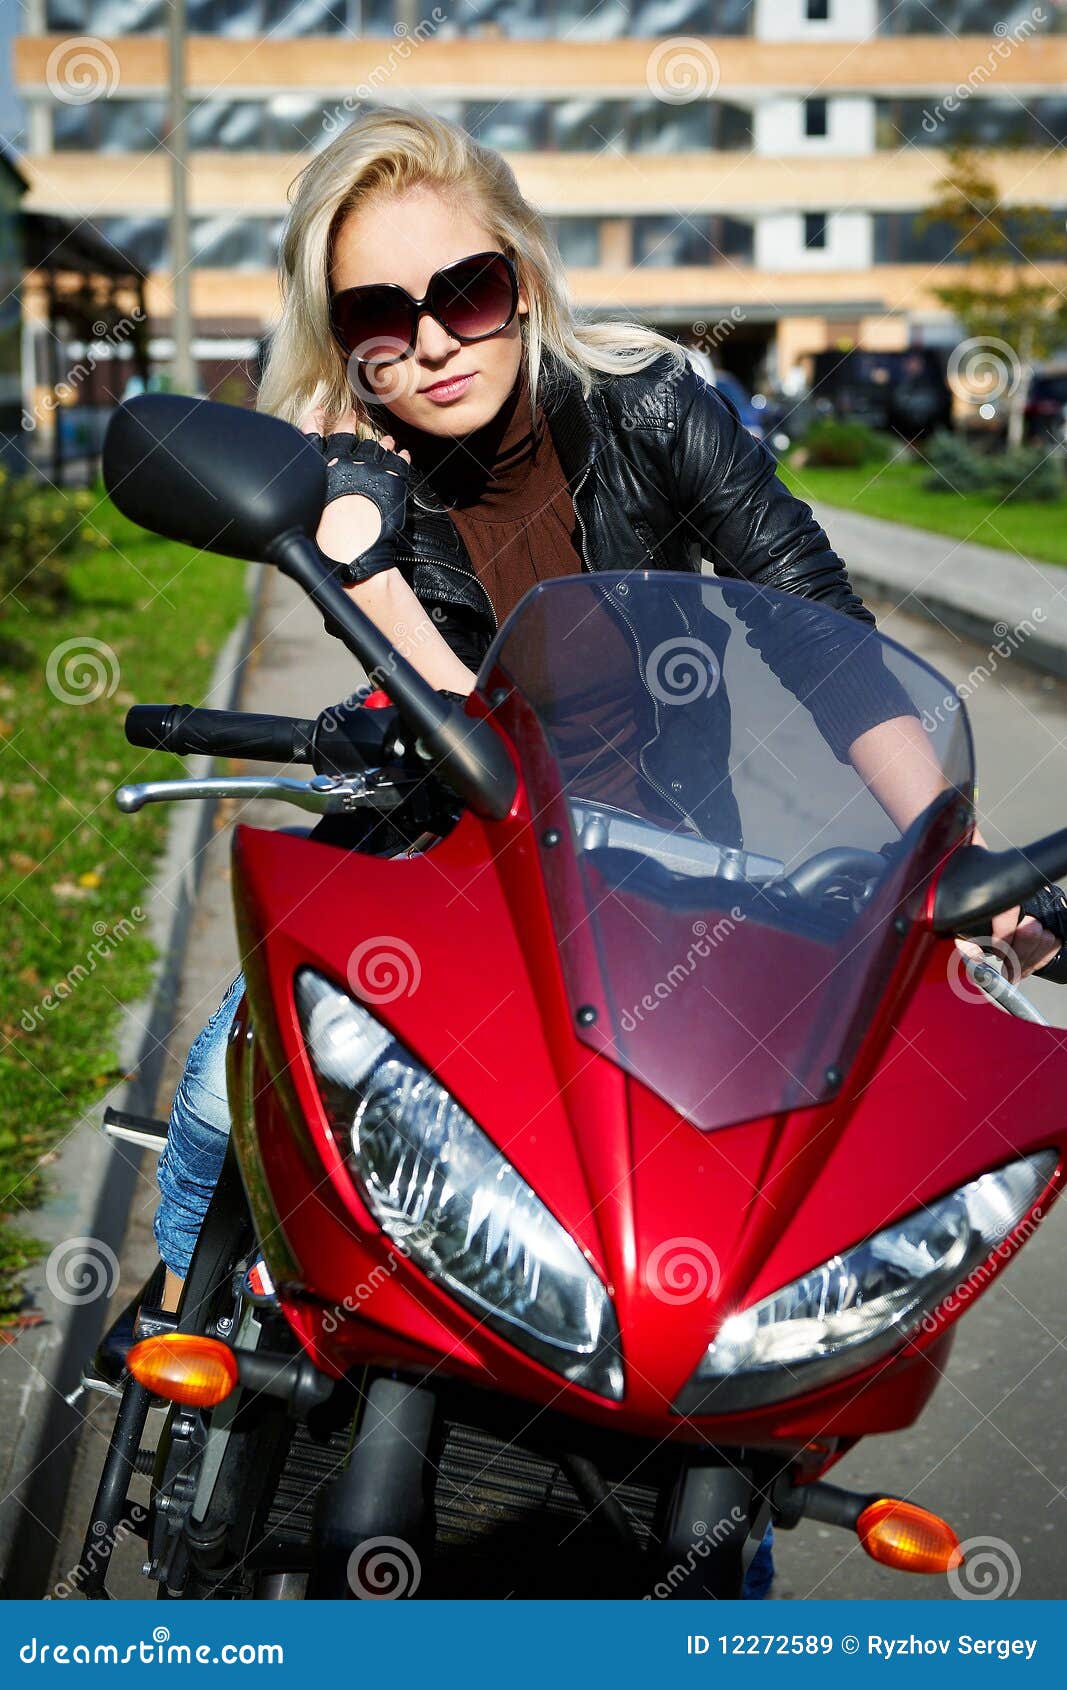 The Girl Blonde Sg On Red Motorcycle Royalty Free Stock 